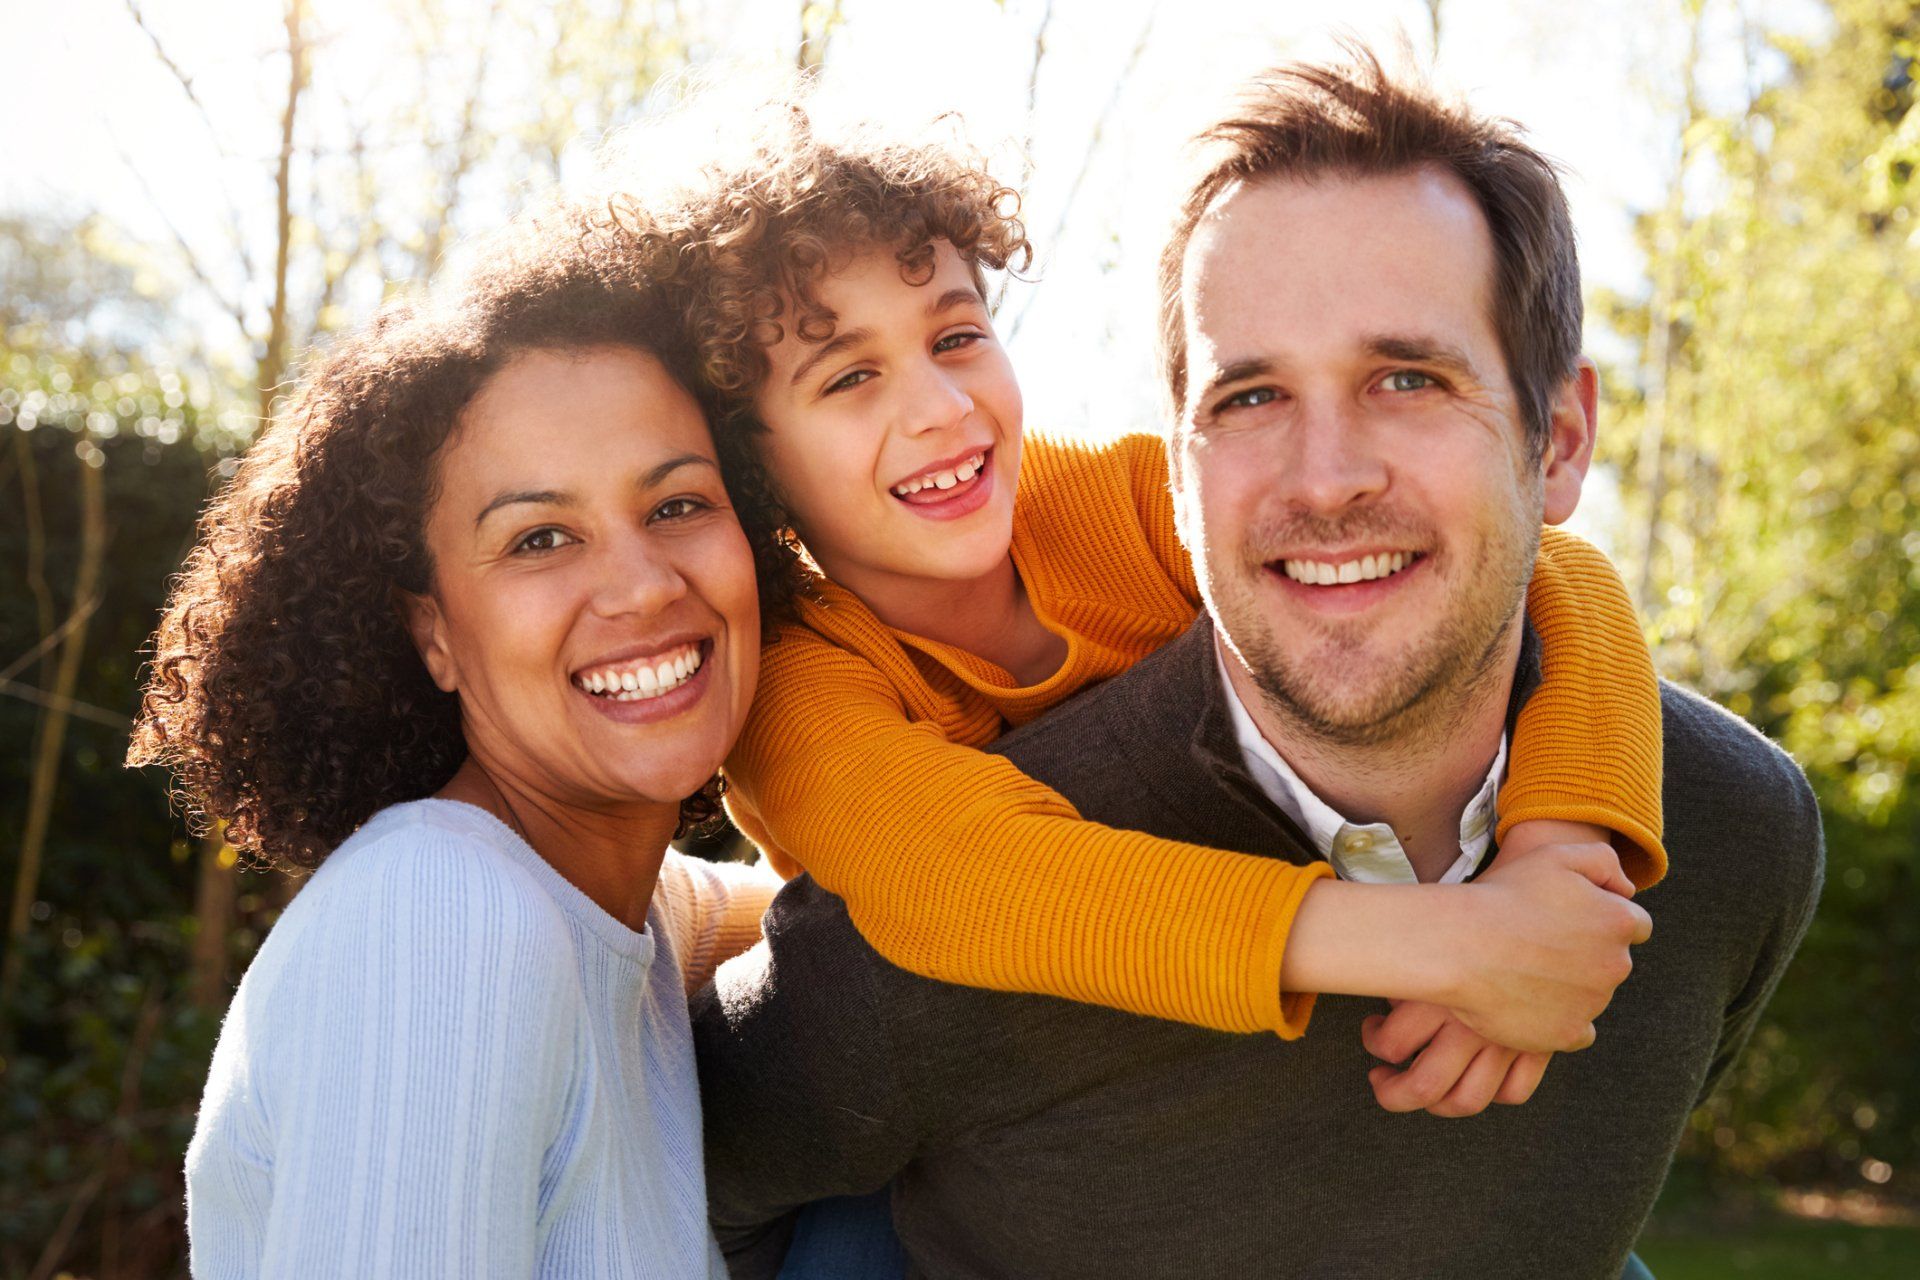 Interracial family enjoying time together and peace of mind